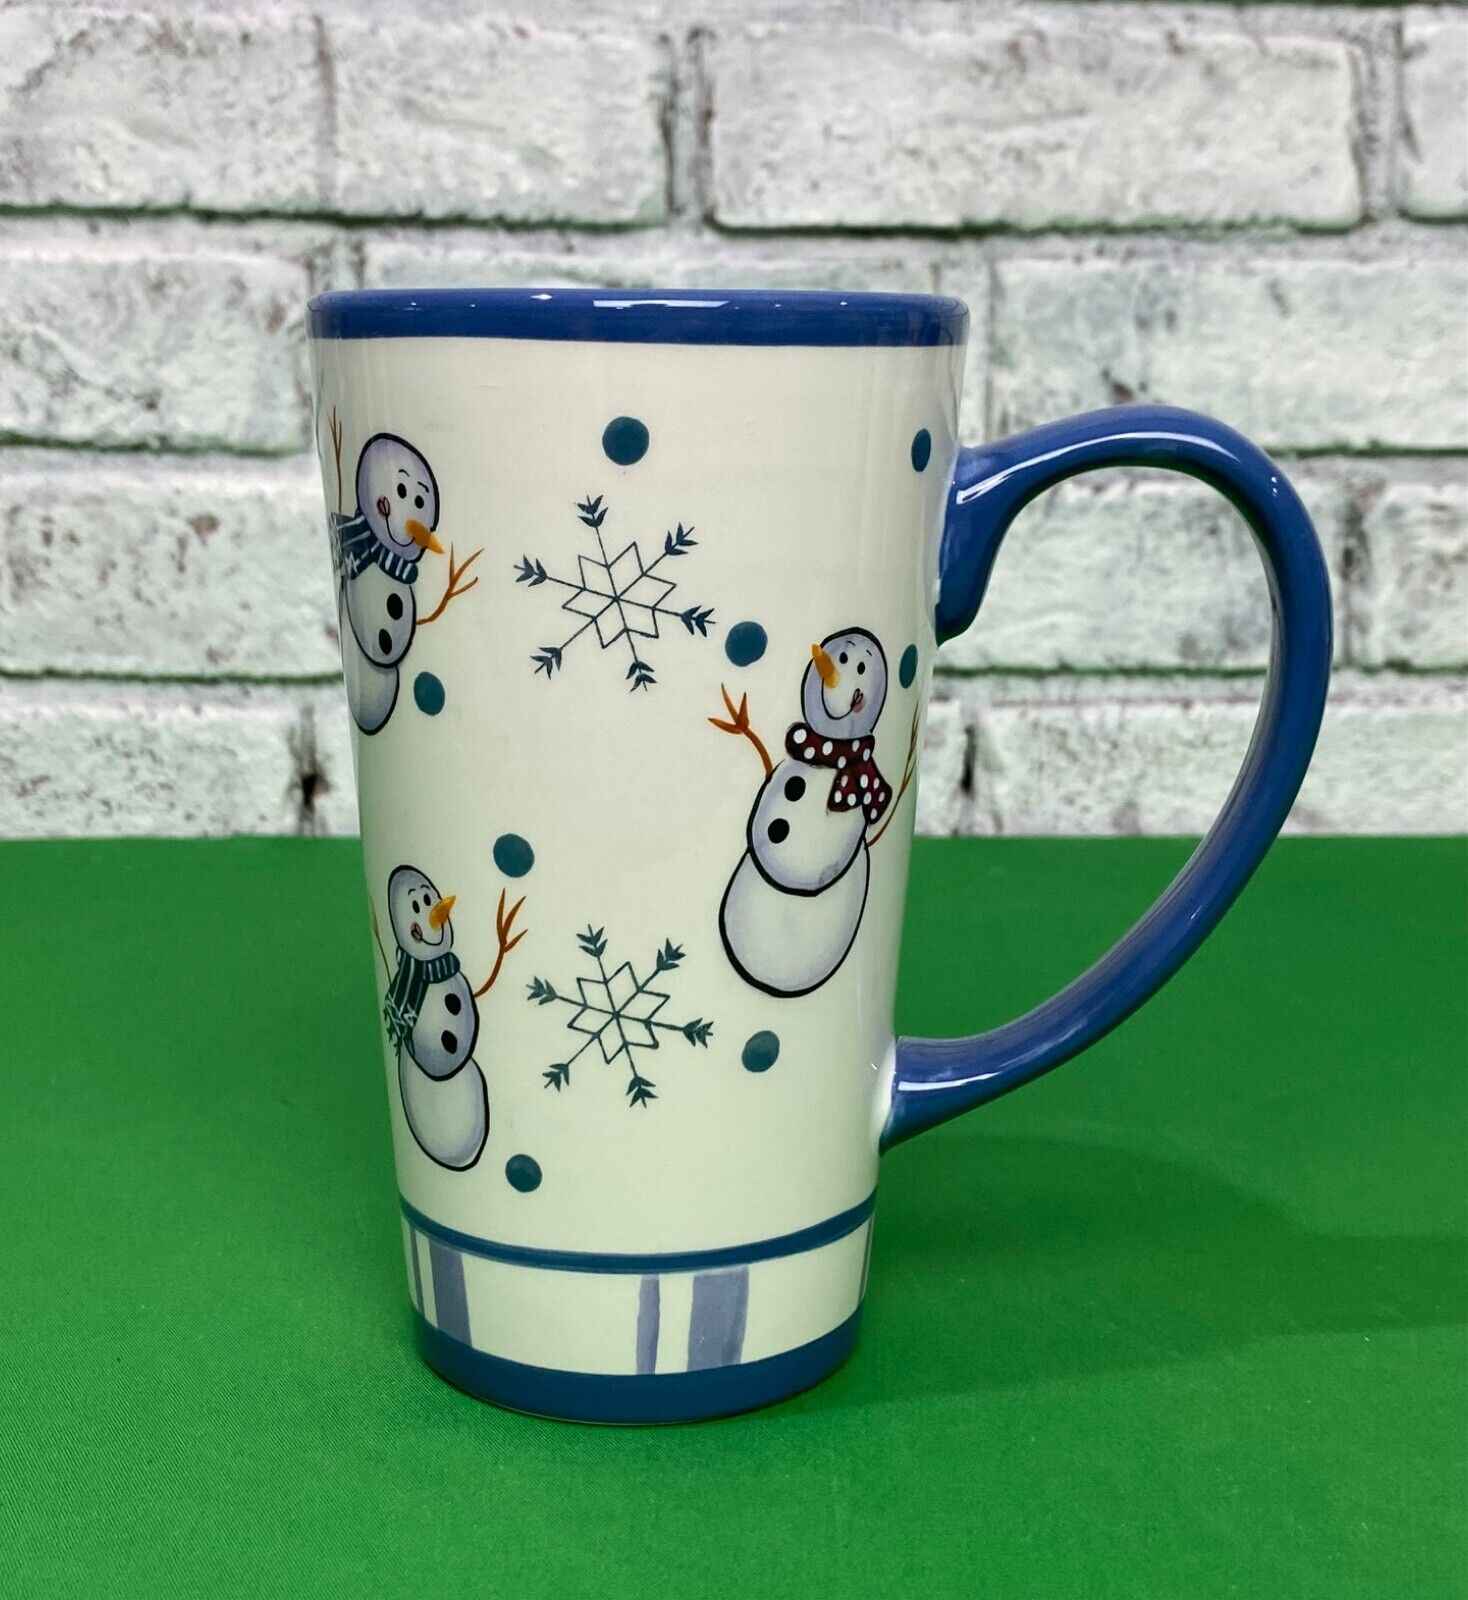 Crazy Mountain Snowman Coffee Mug White With Blue Handle 16 oz Hot Coco Cup